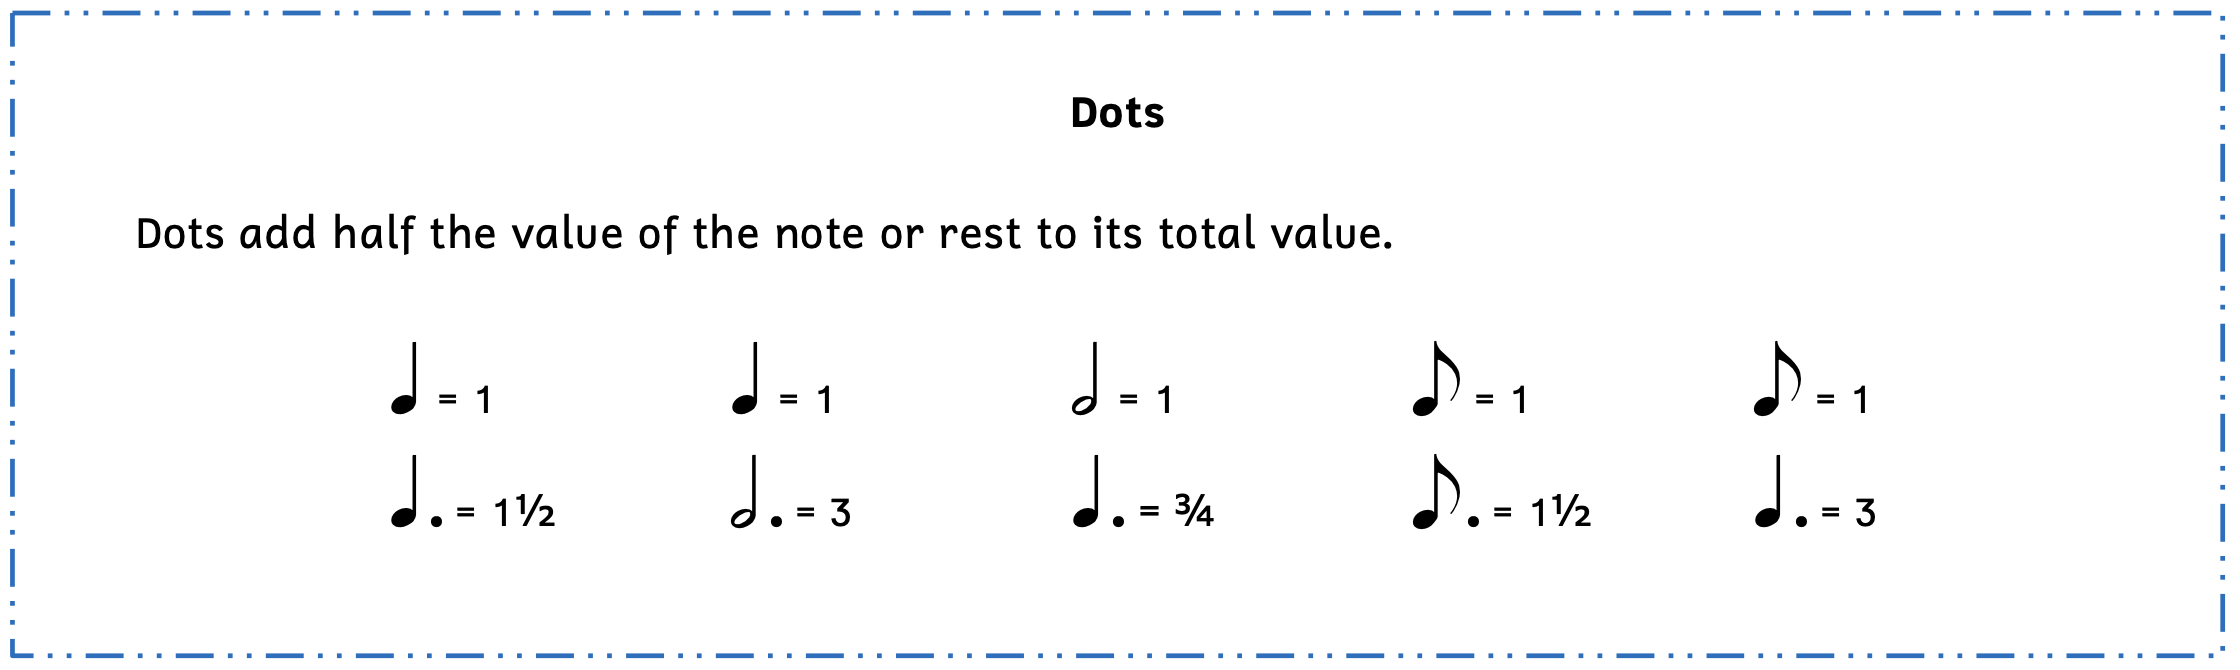 Summary box of note values and dotted note values. Dots add half the value of the note or rest to its total value. If a quarter note equals 1, a dotted quarter note equals 1 and a half and a dotted half note equals 3. If a half note equals 1, a dotted quarter note is equal to three-fourths. If an eighth note equals 1, a dotted eighth note is equal to one and a half and a dotted quarter note is equal to 3.